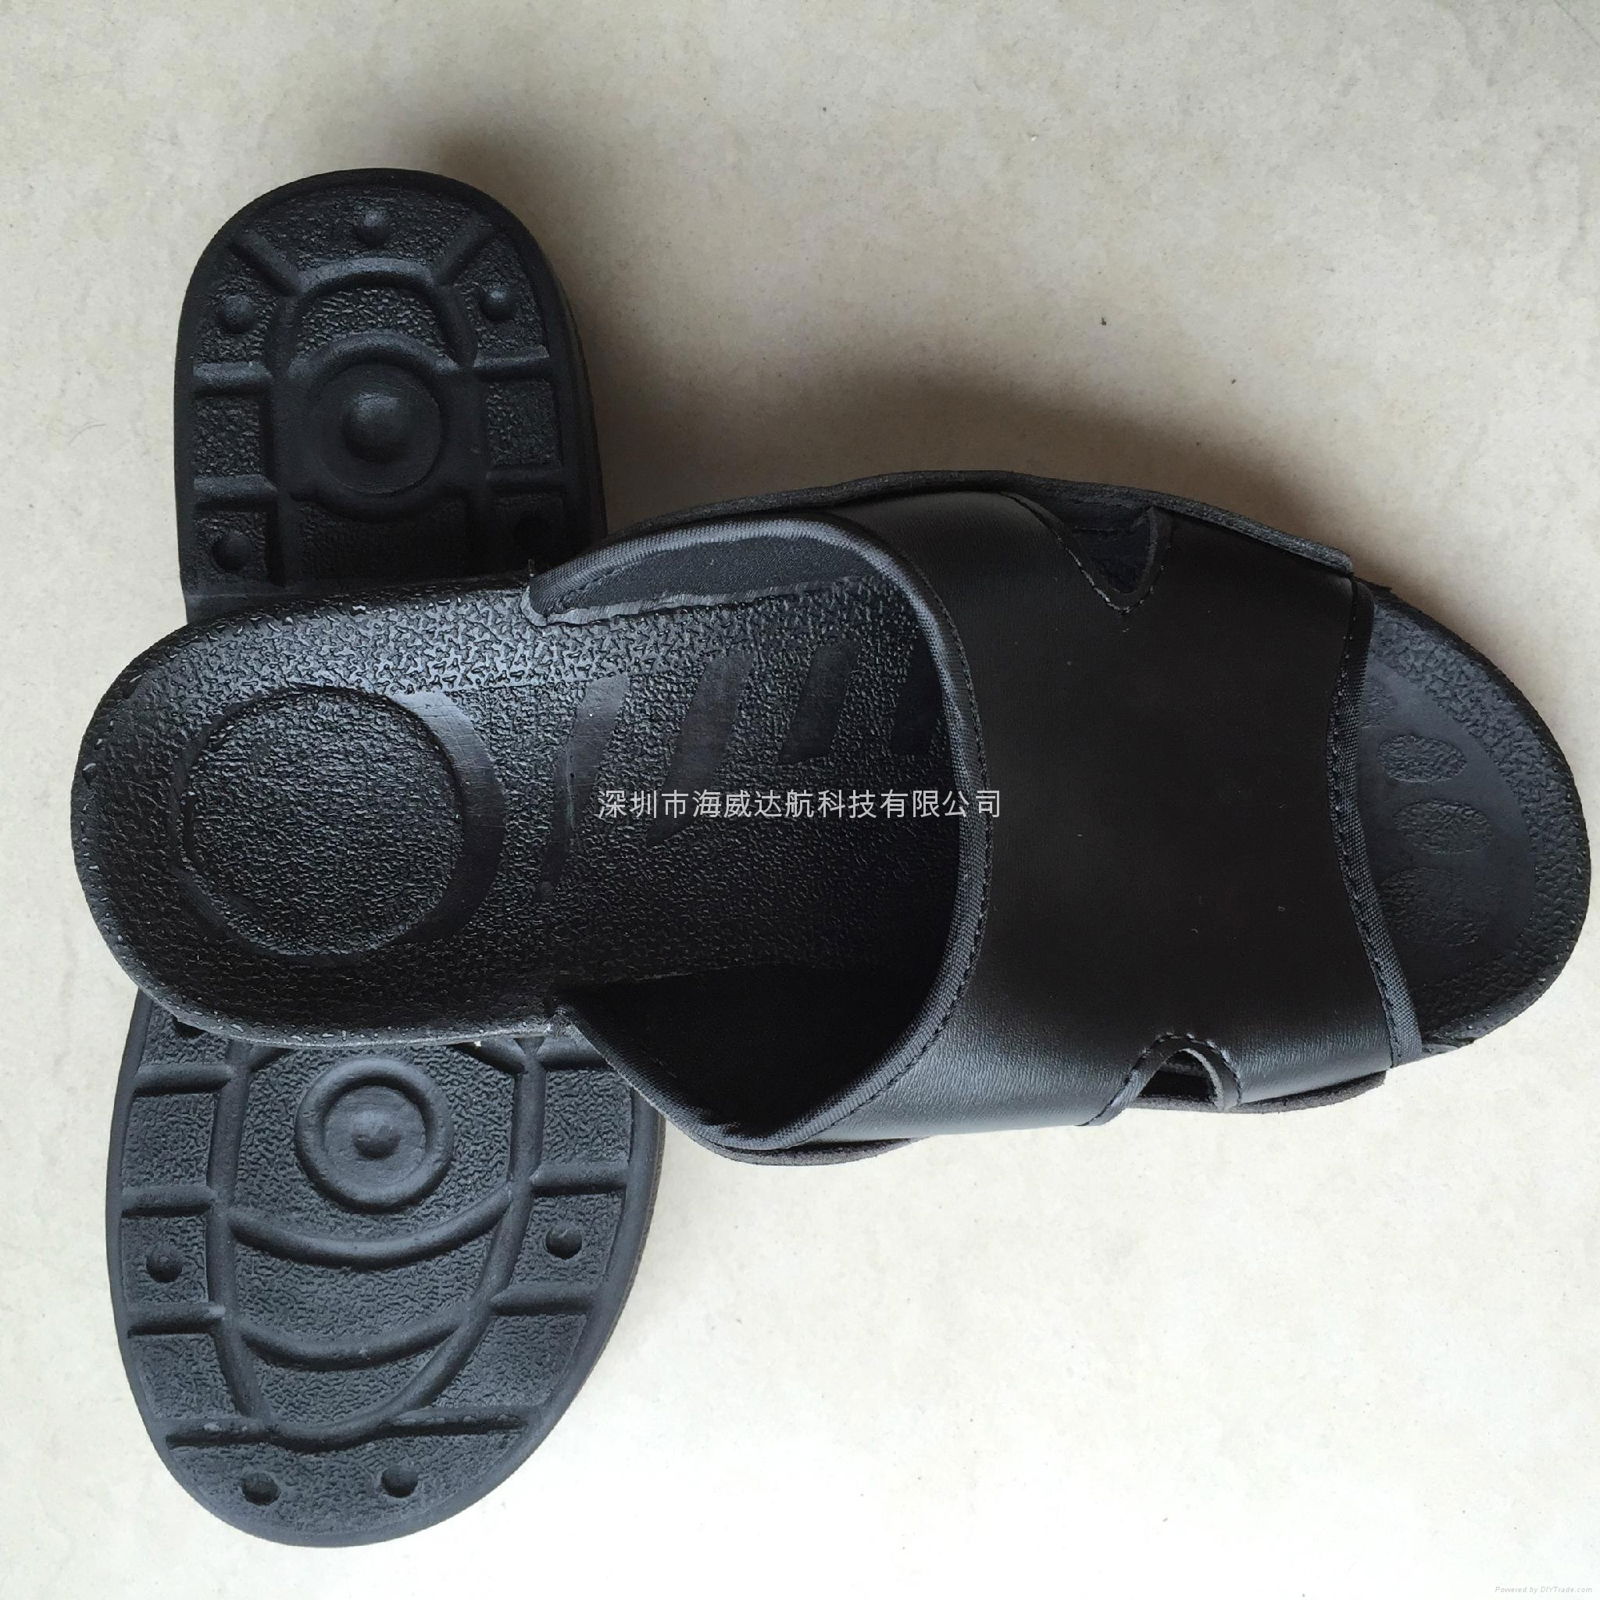 Antistatic Slippers / ESD Slippers 2